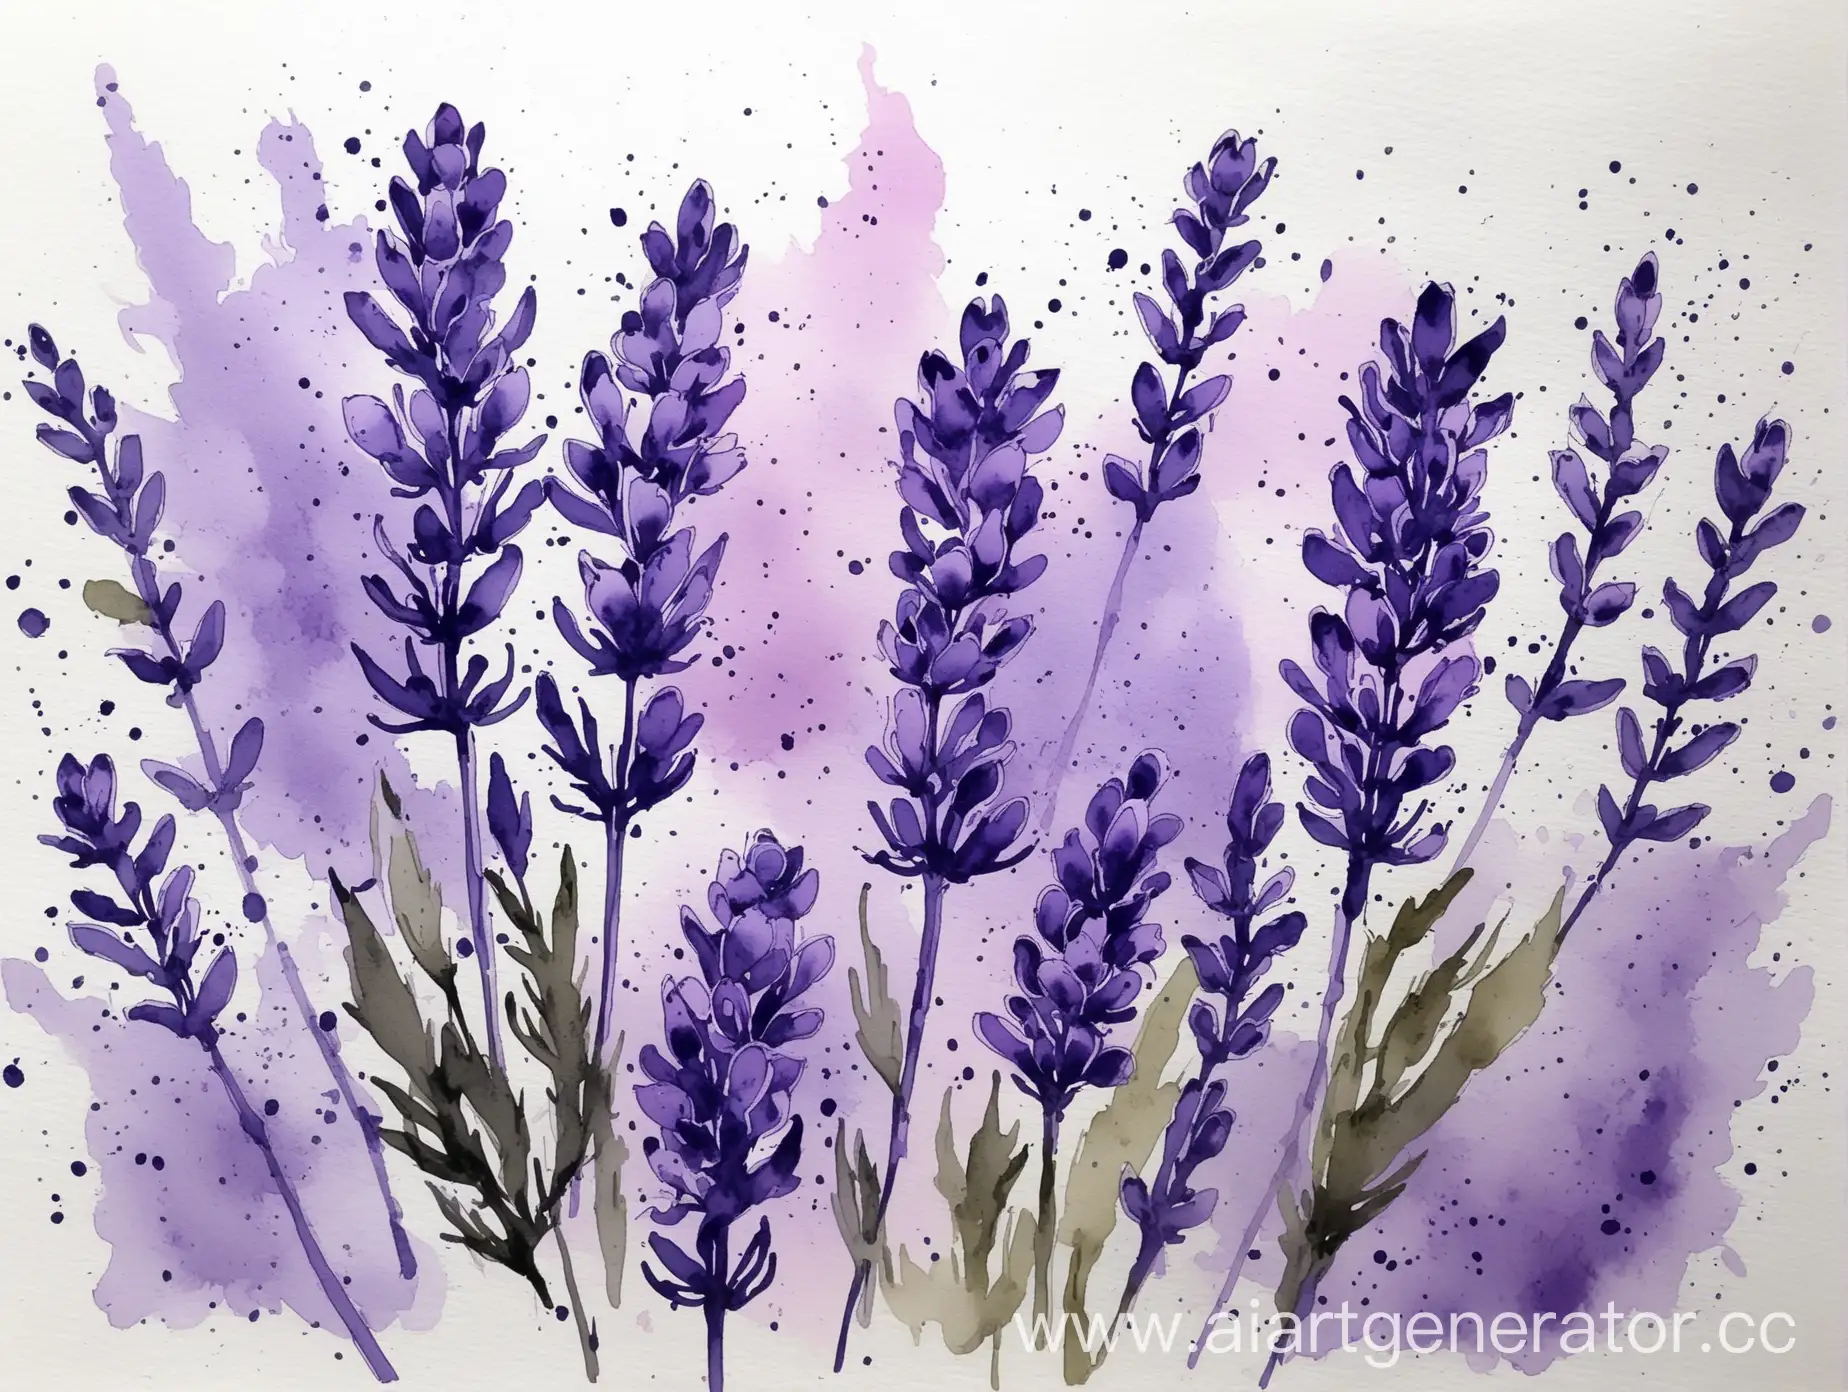 Lavender-Flowers-in-Ink-and-Watercolor-Serene-Botanical-Illustration-in-Lilac-Tones